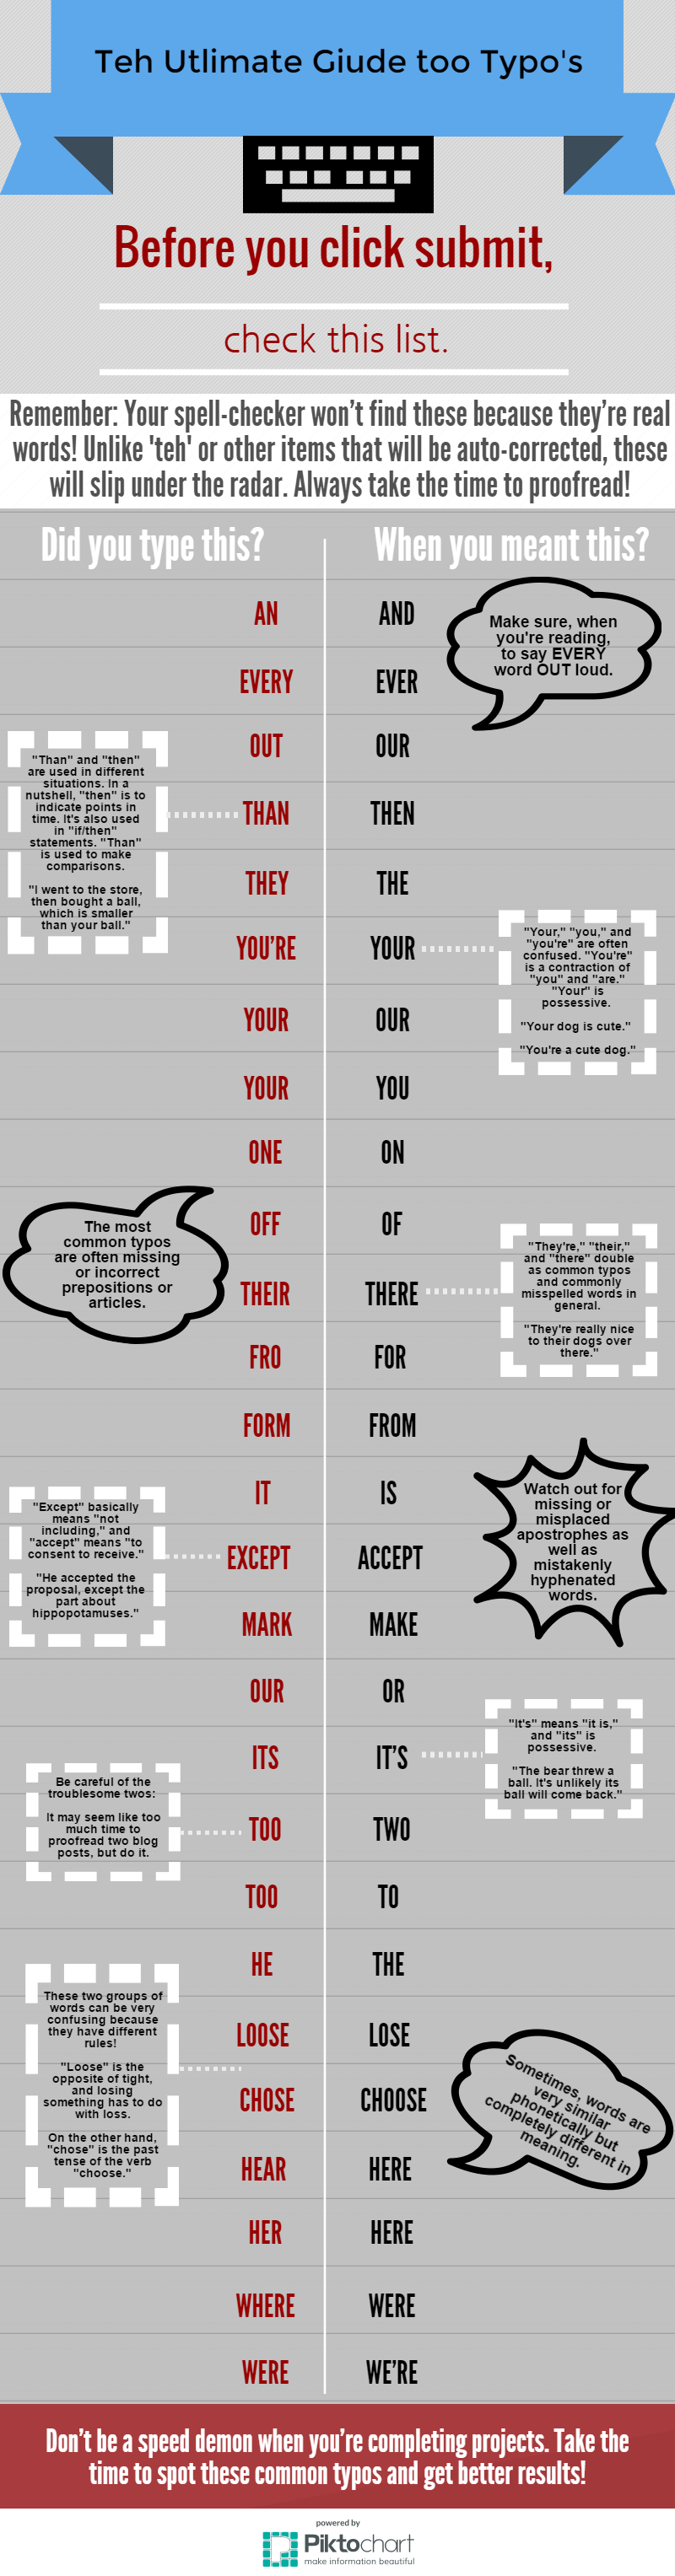 Infographic: Ultimate Guide to Typos